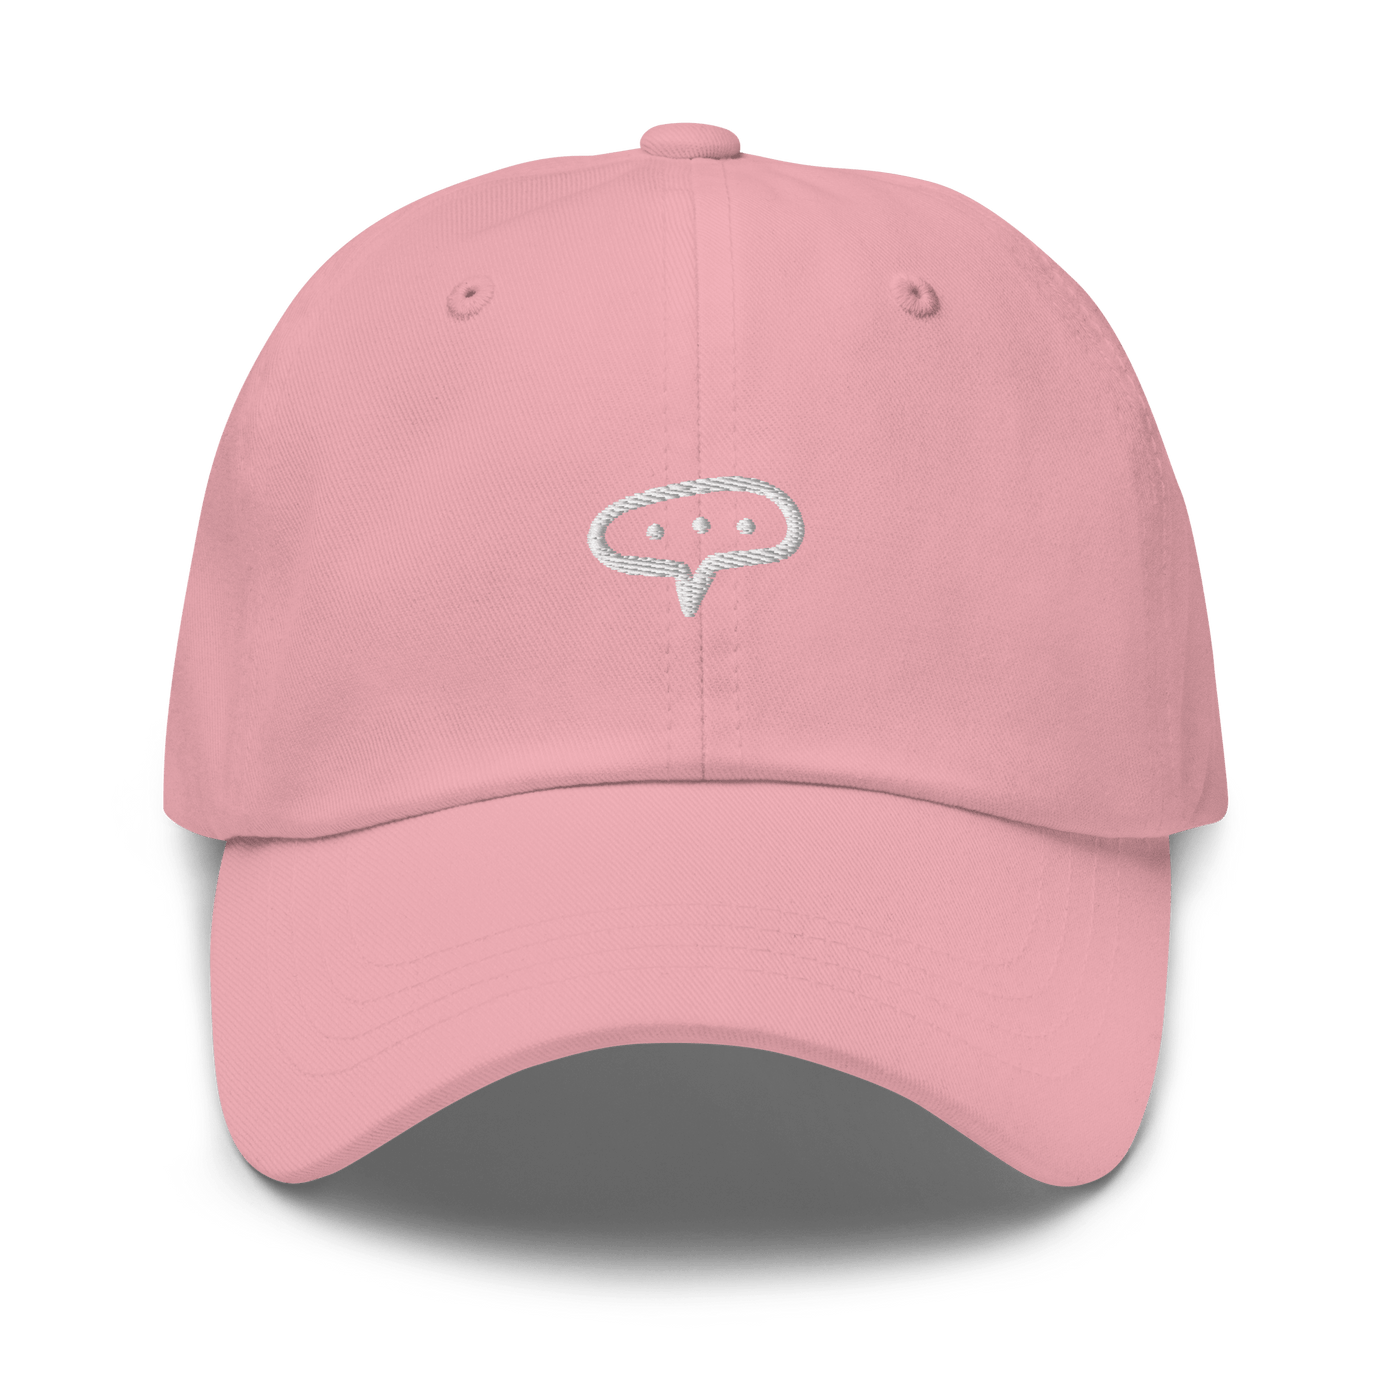 Thinking Dad hat - Stone - - Just Another Cap Store